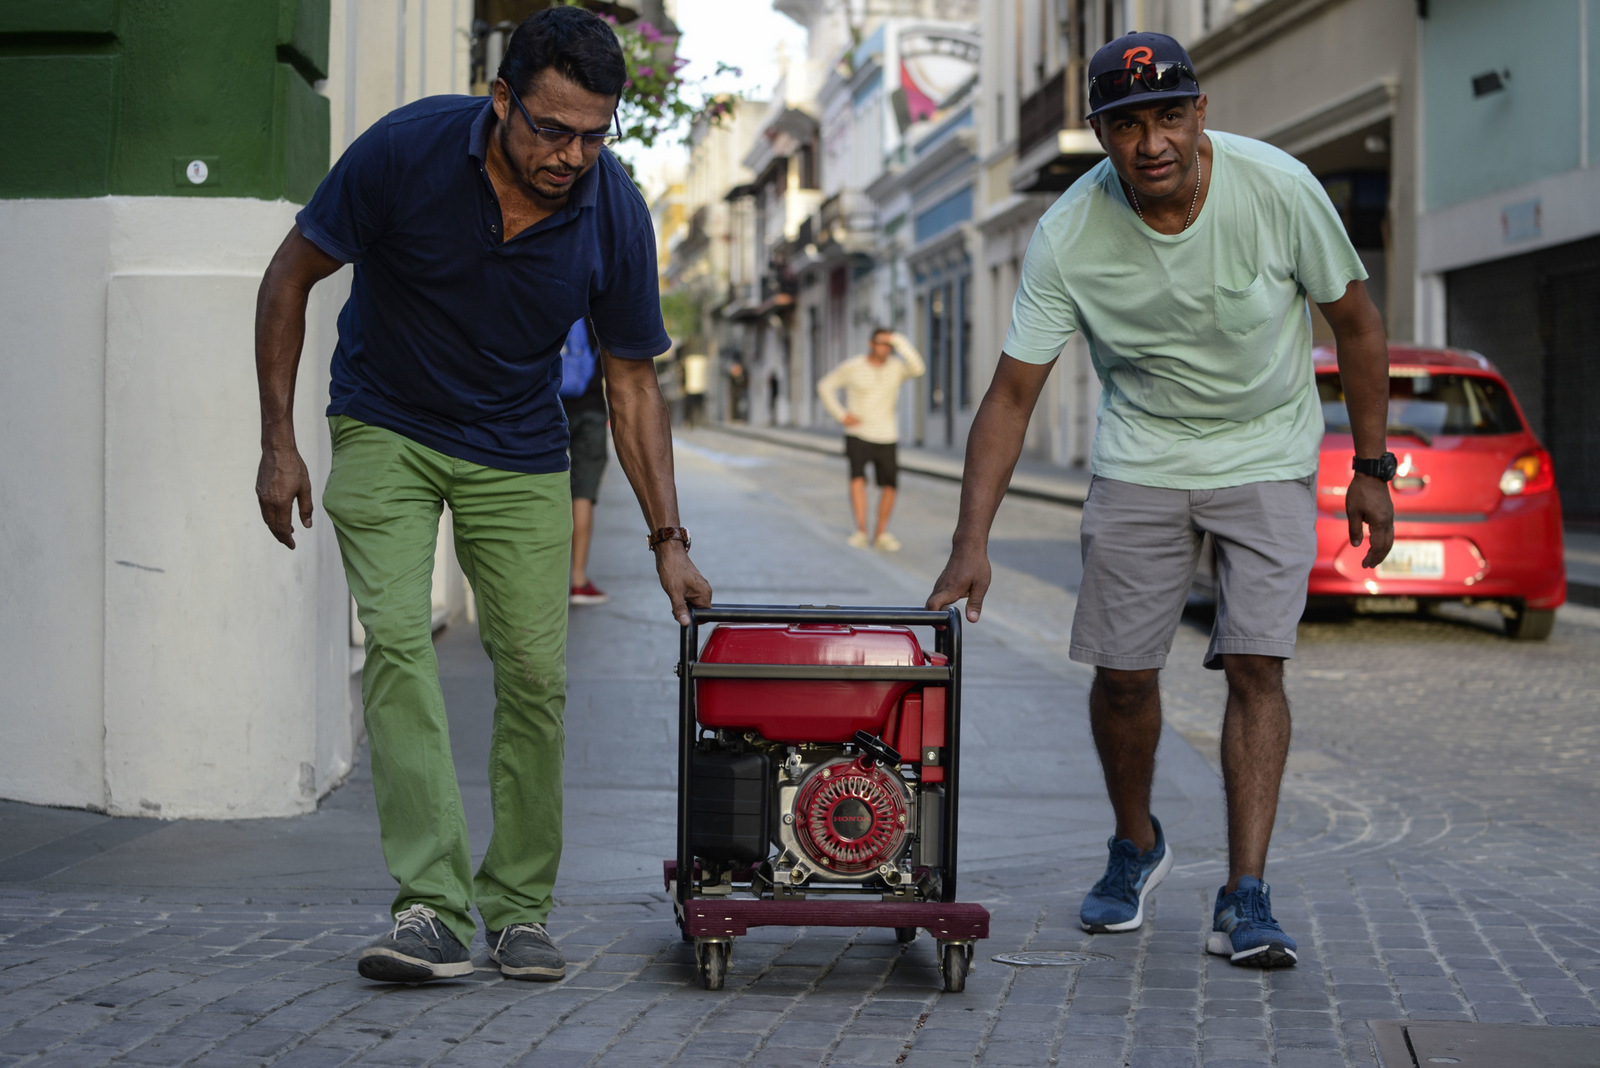 Men push a generator along Fortaleza street, one month after Hurricane Maria in San Juan, Puerto Rico. Maria roared across the island on Sept. 20 and after a month, only 30 percent of residents have power, Oct. 20, 2017 . (AP/Carlos Giusti)